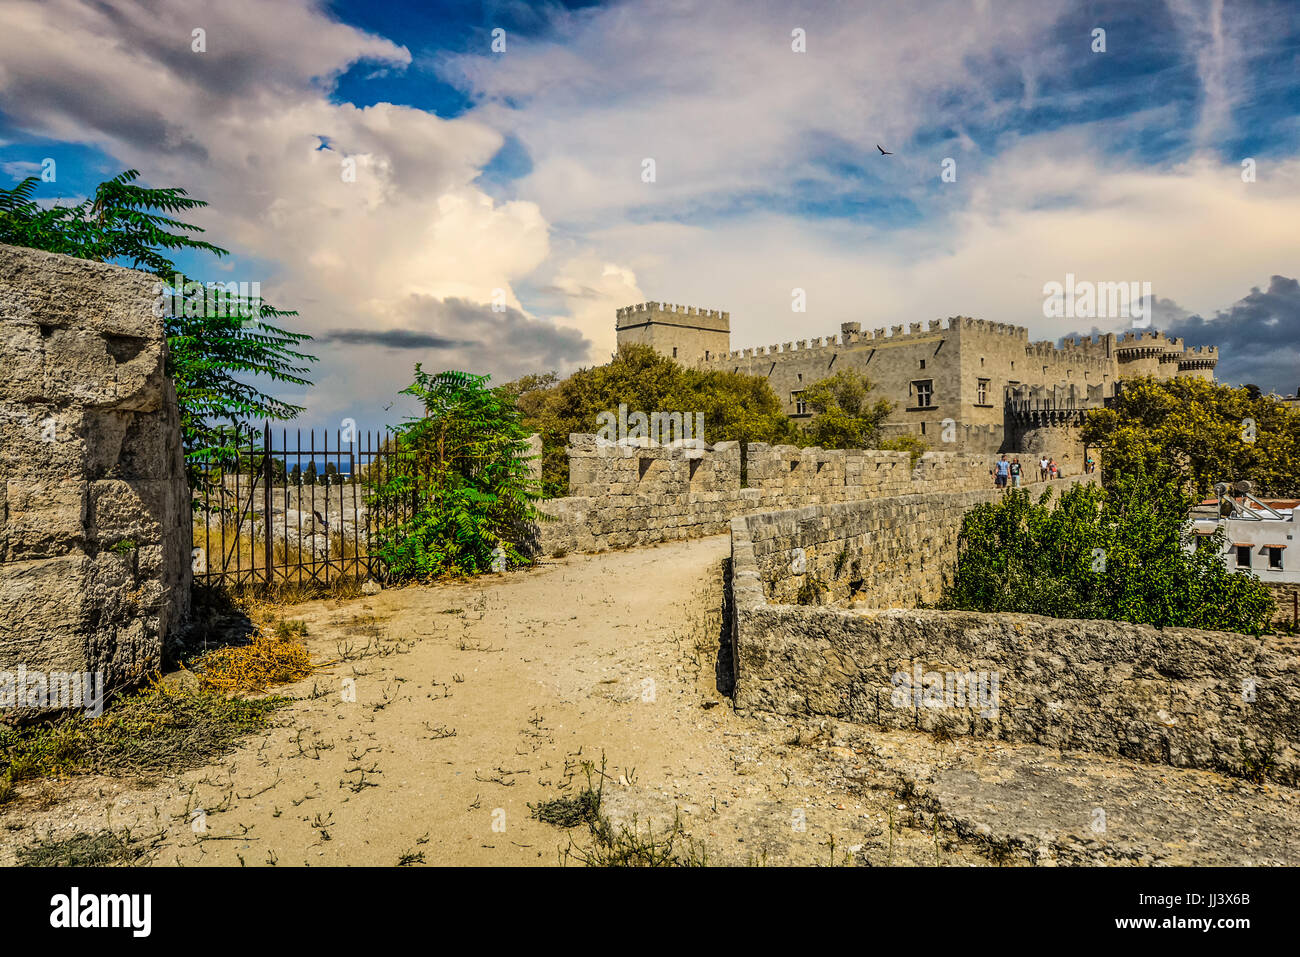 Ancient Greek Castle or Fortress on the Mediterranean island of Rhodes Greece on a warm summer day Stock Photo